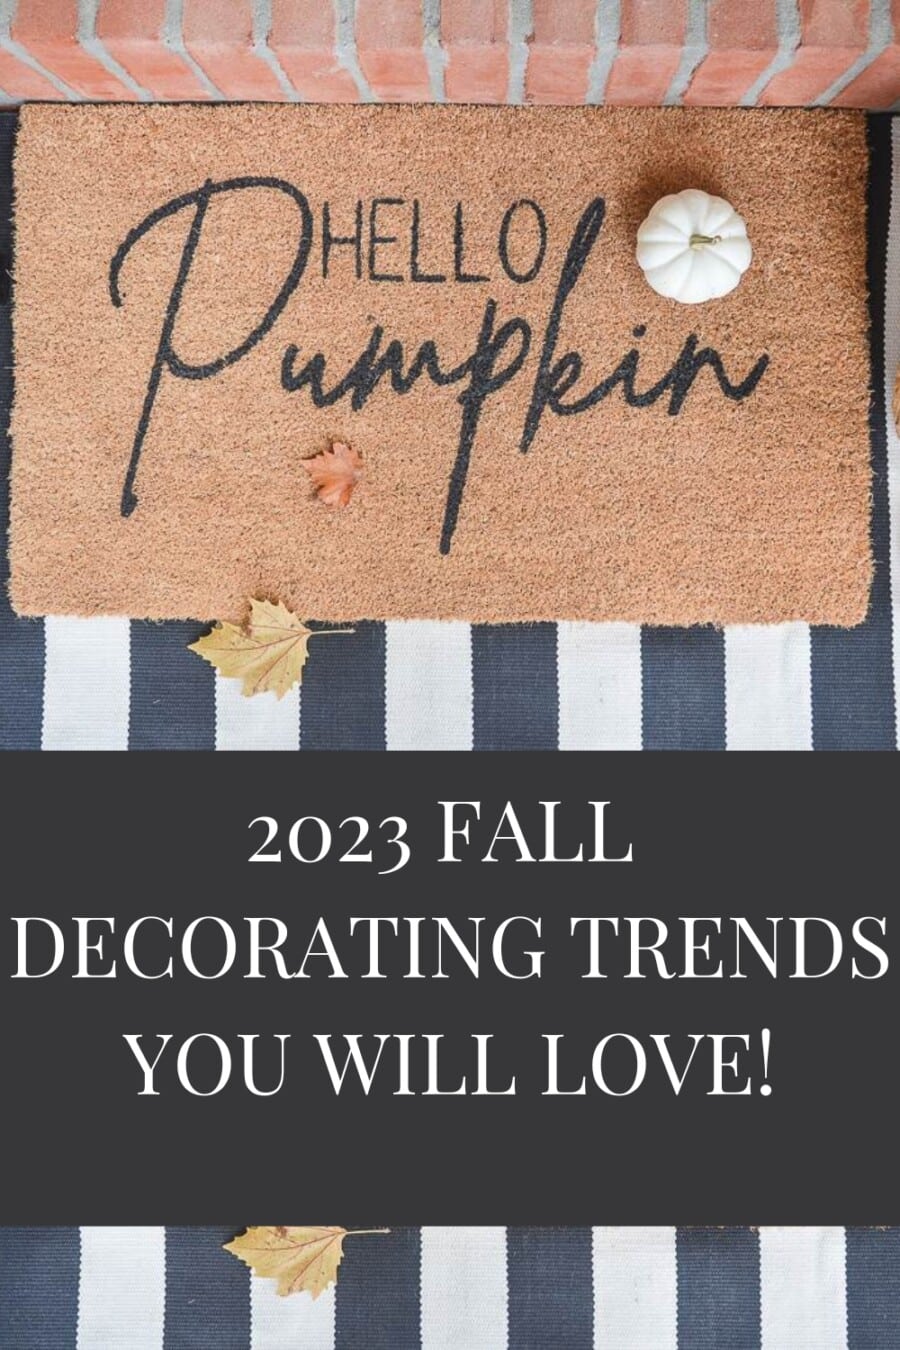 8 Fall Decorating Trends To Look Forward To In 2023 - StoneGable